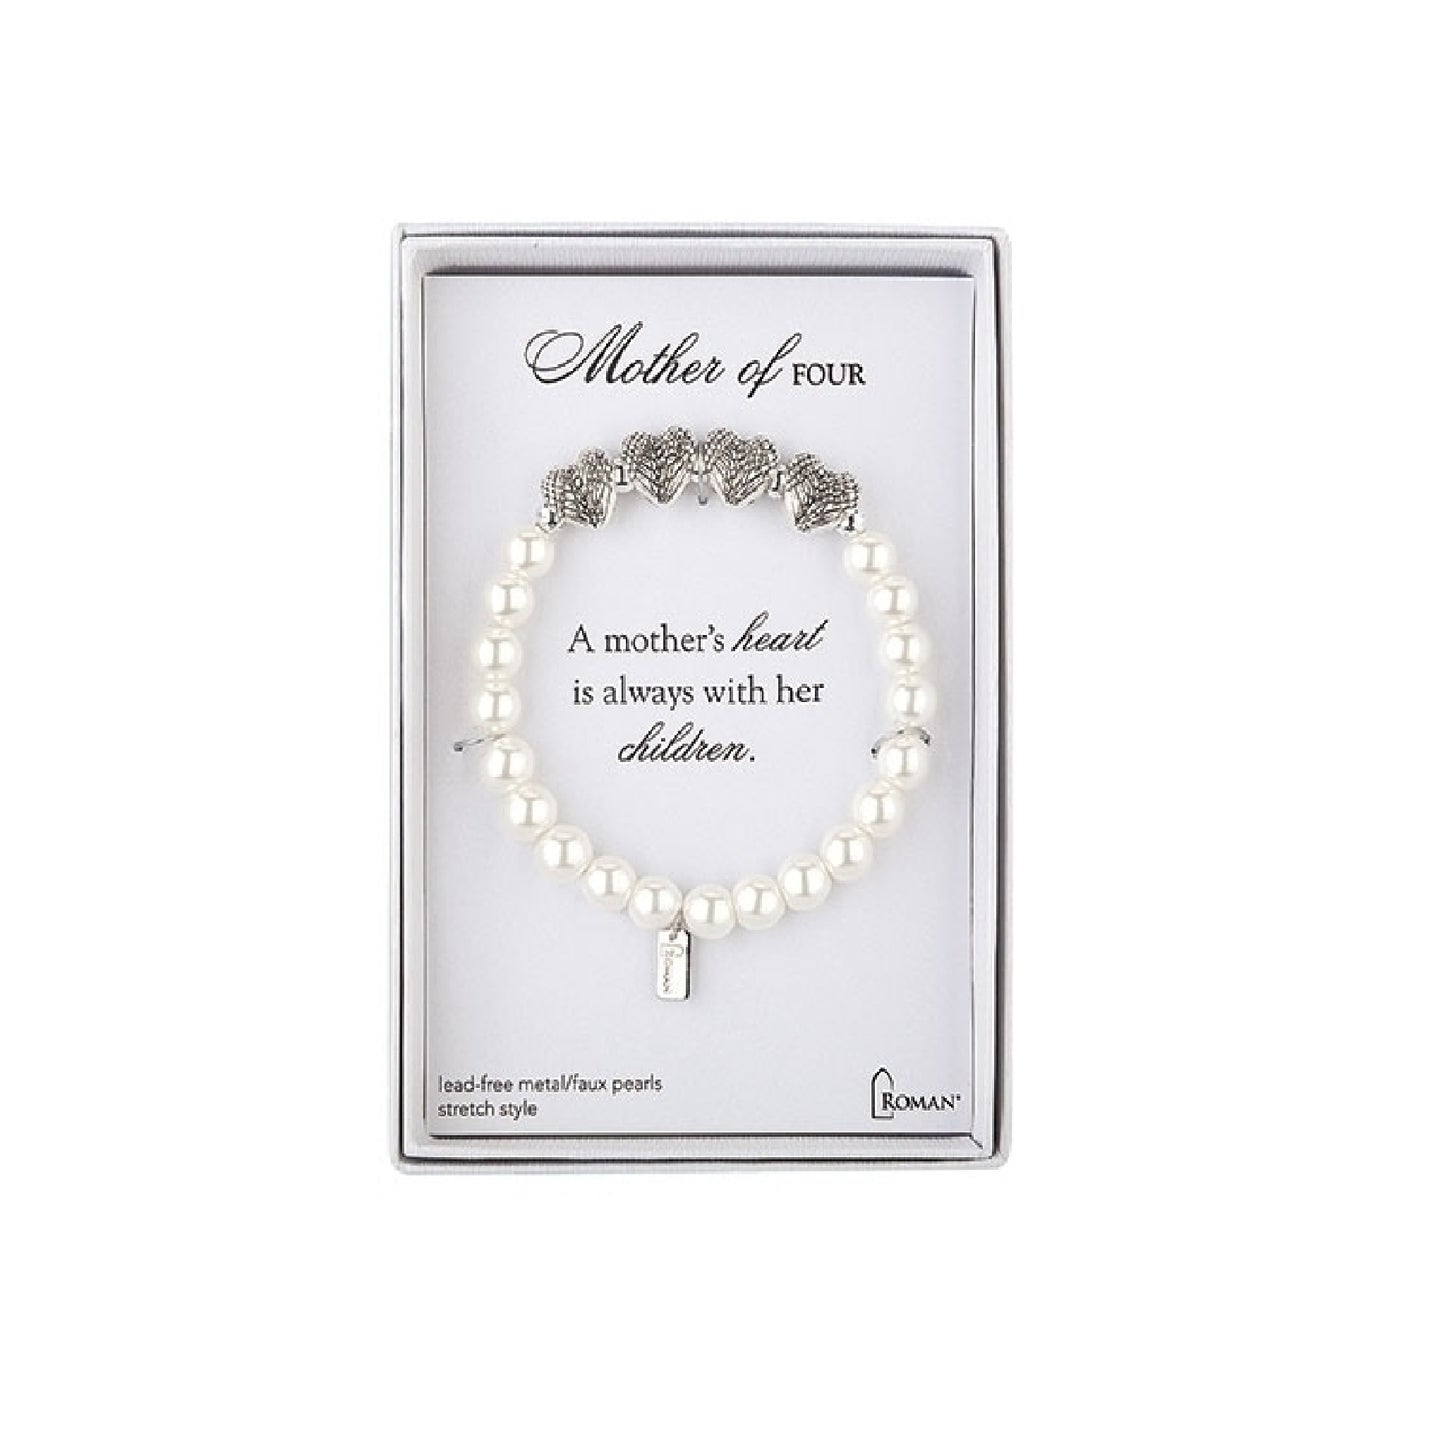 Mother of Four White Faux Pearl Stretch Bracelet 7"